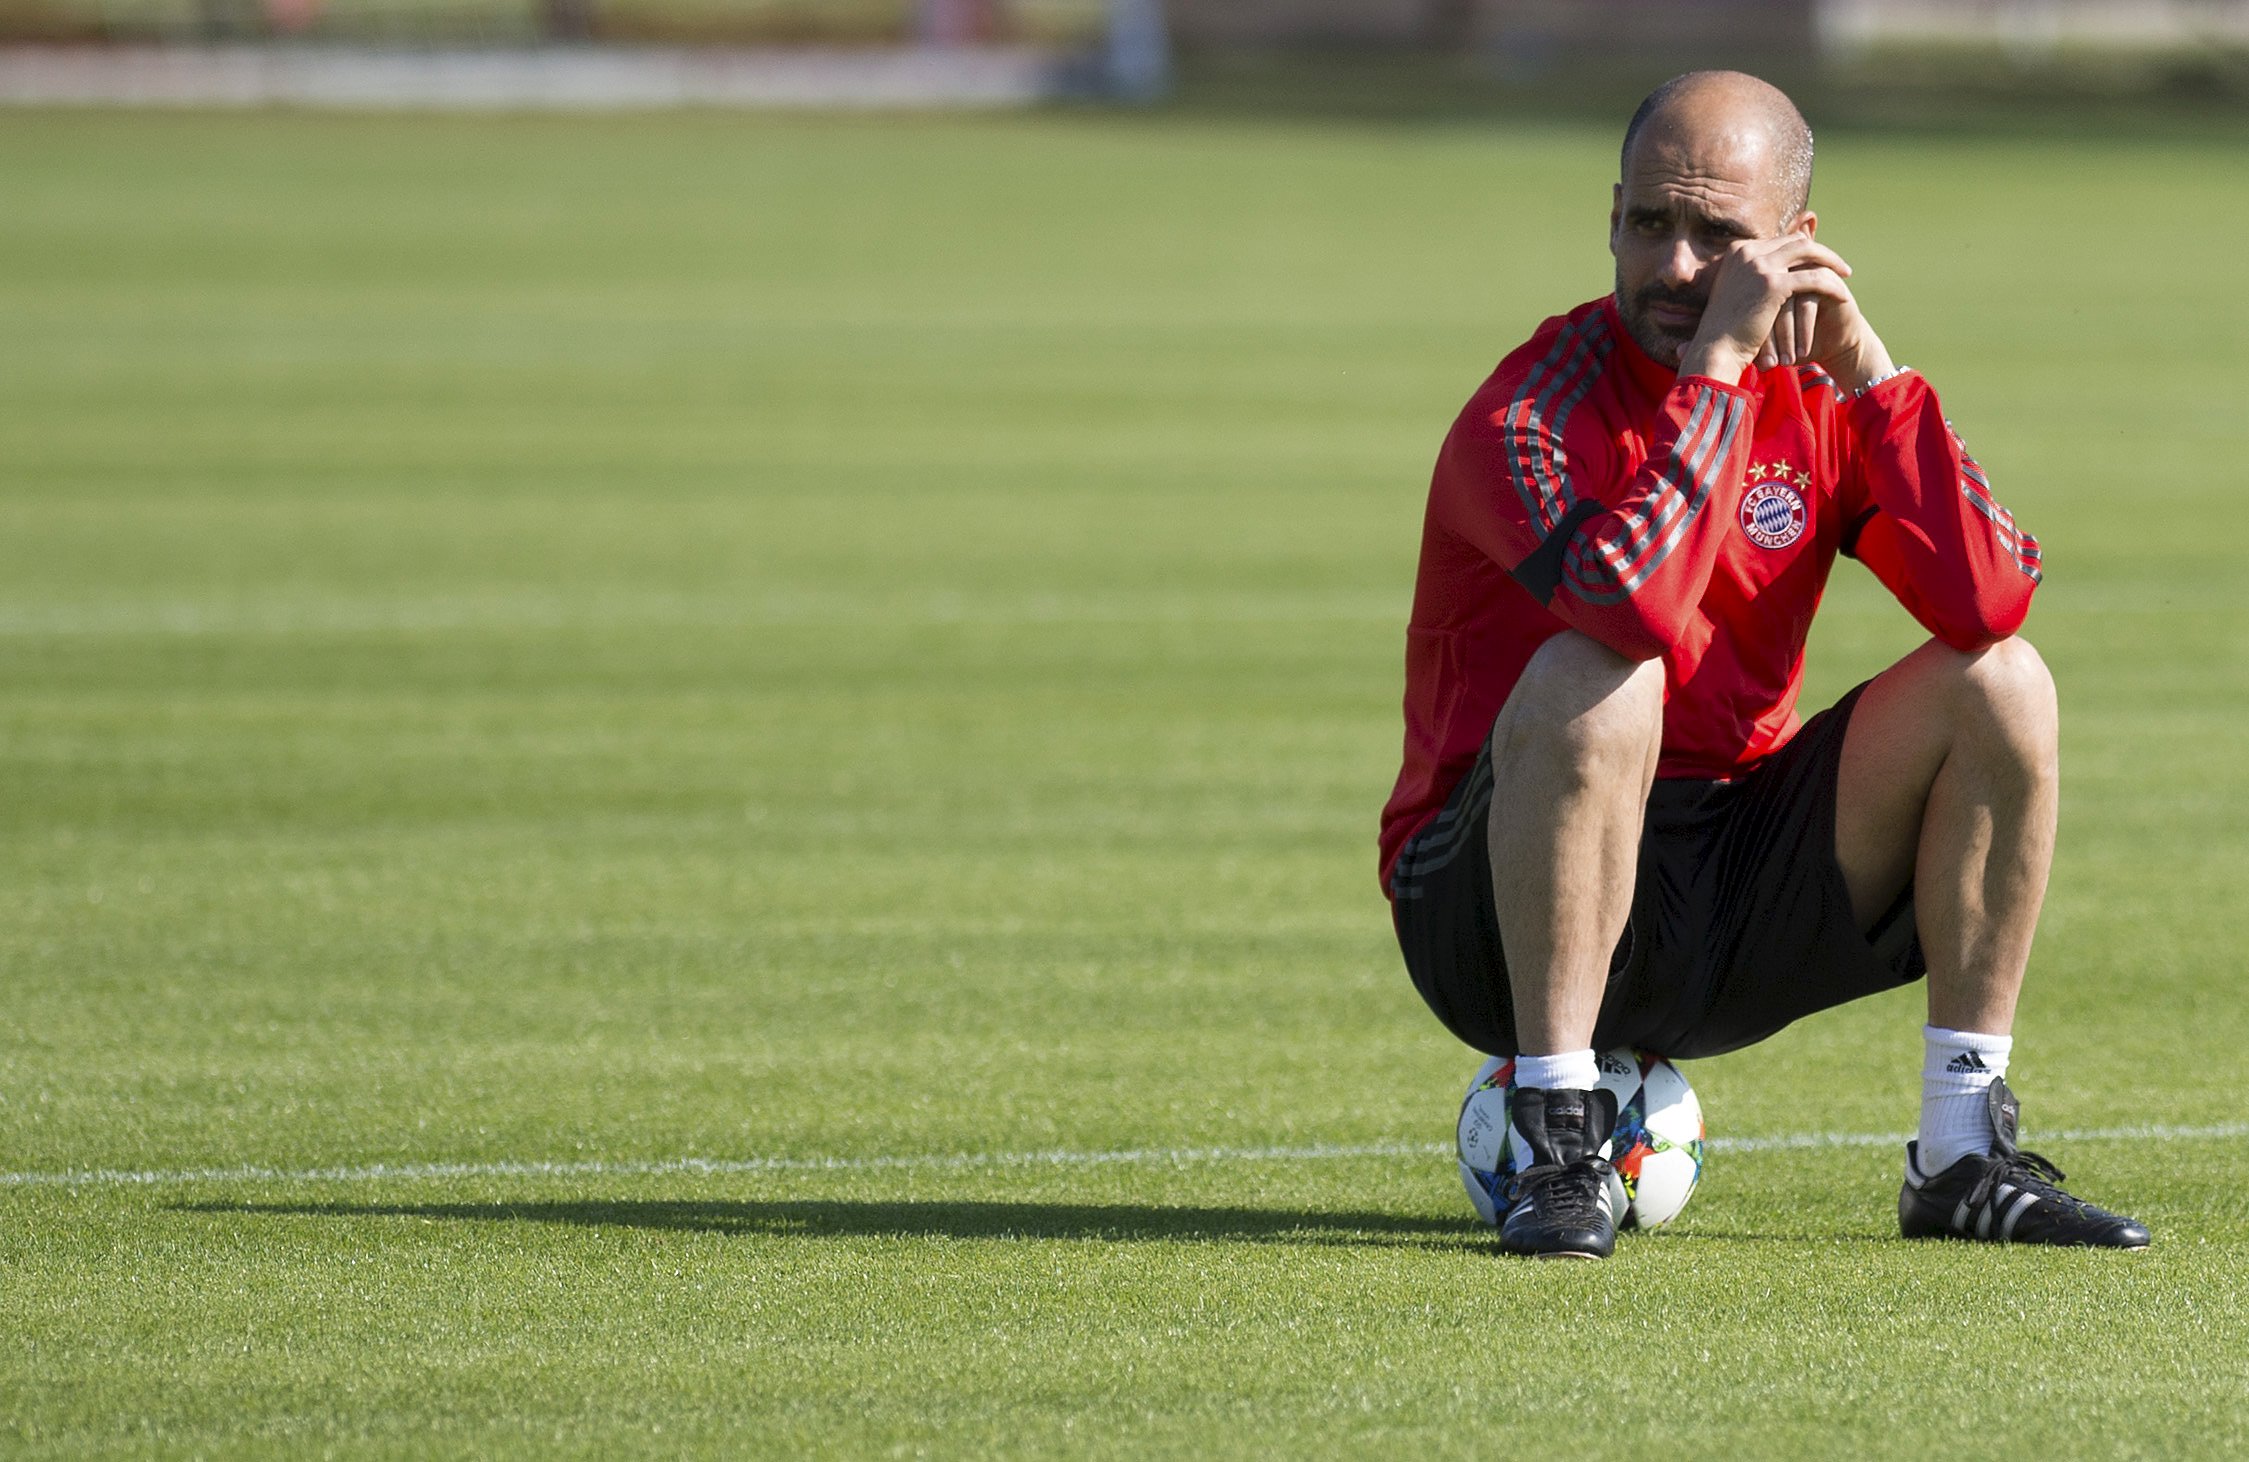 Bayern Munich's coach Pep Guardiola pauses during a training session at the club's training ground in Munich April 20, 2015. Bayern Munich will play their Champions League quarter-final second leg soccer match against Porto on Tuesday. REUTERS/Lukas Barth